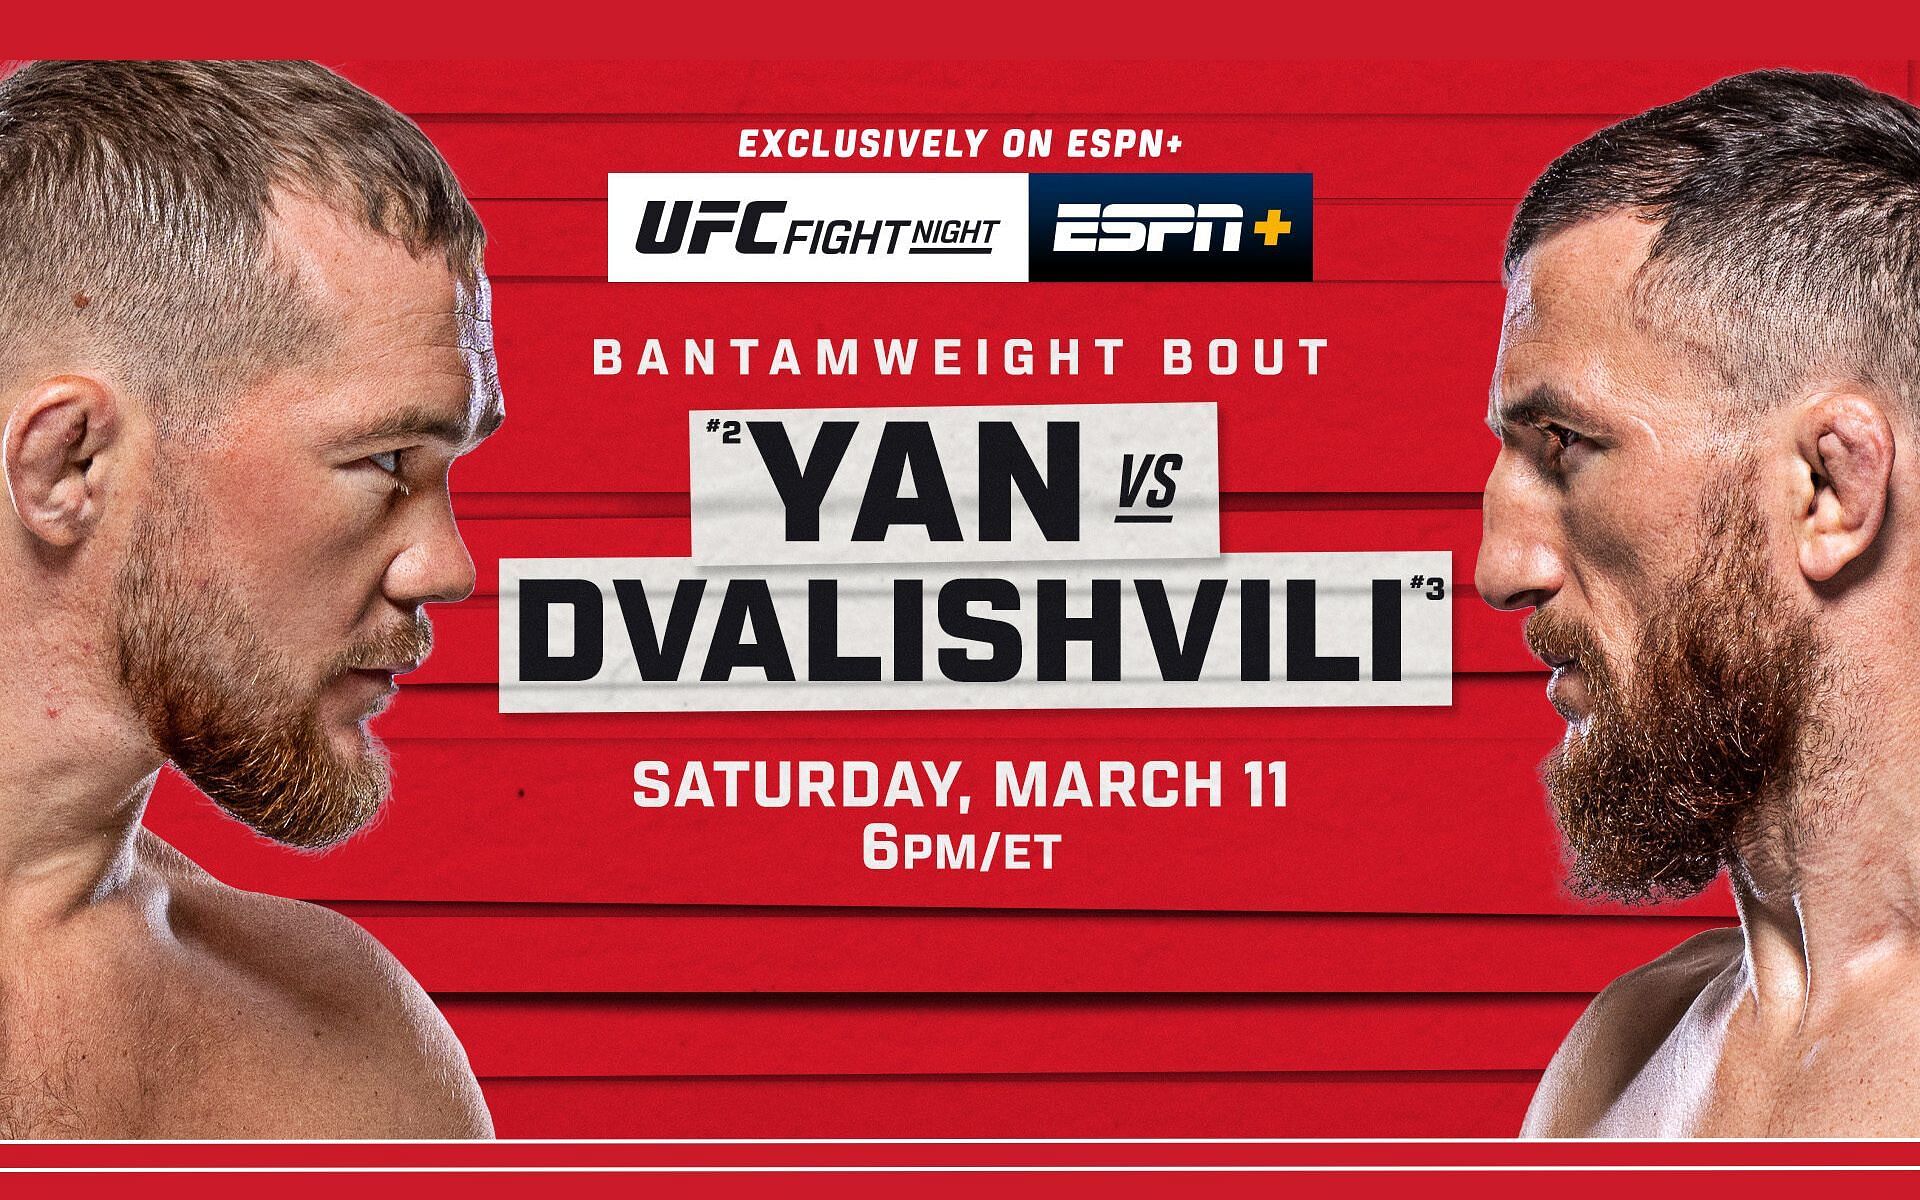 UFC Fight Night Whos fighting in the UFC card tonight, March 11, 2023?